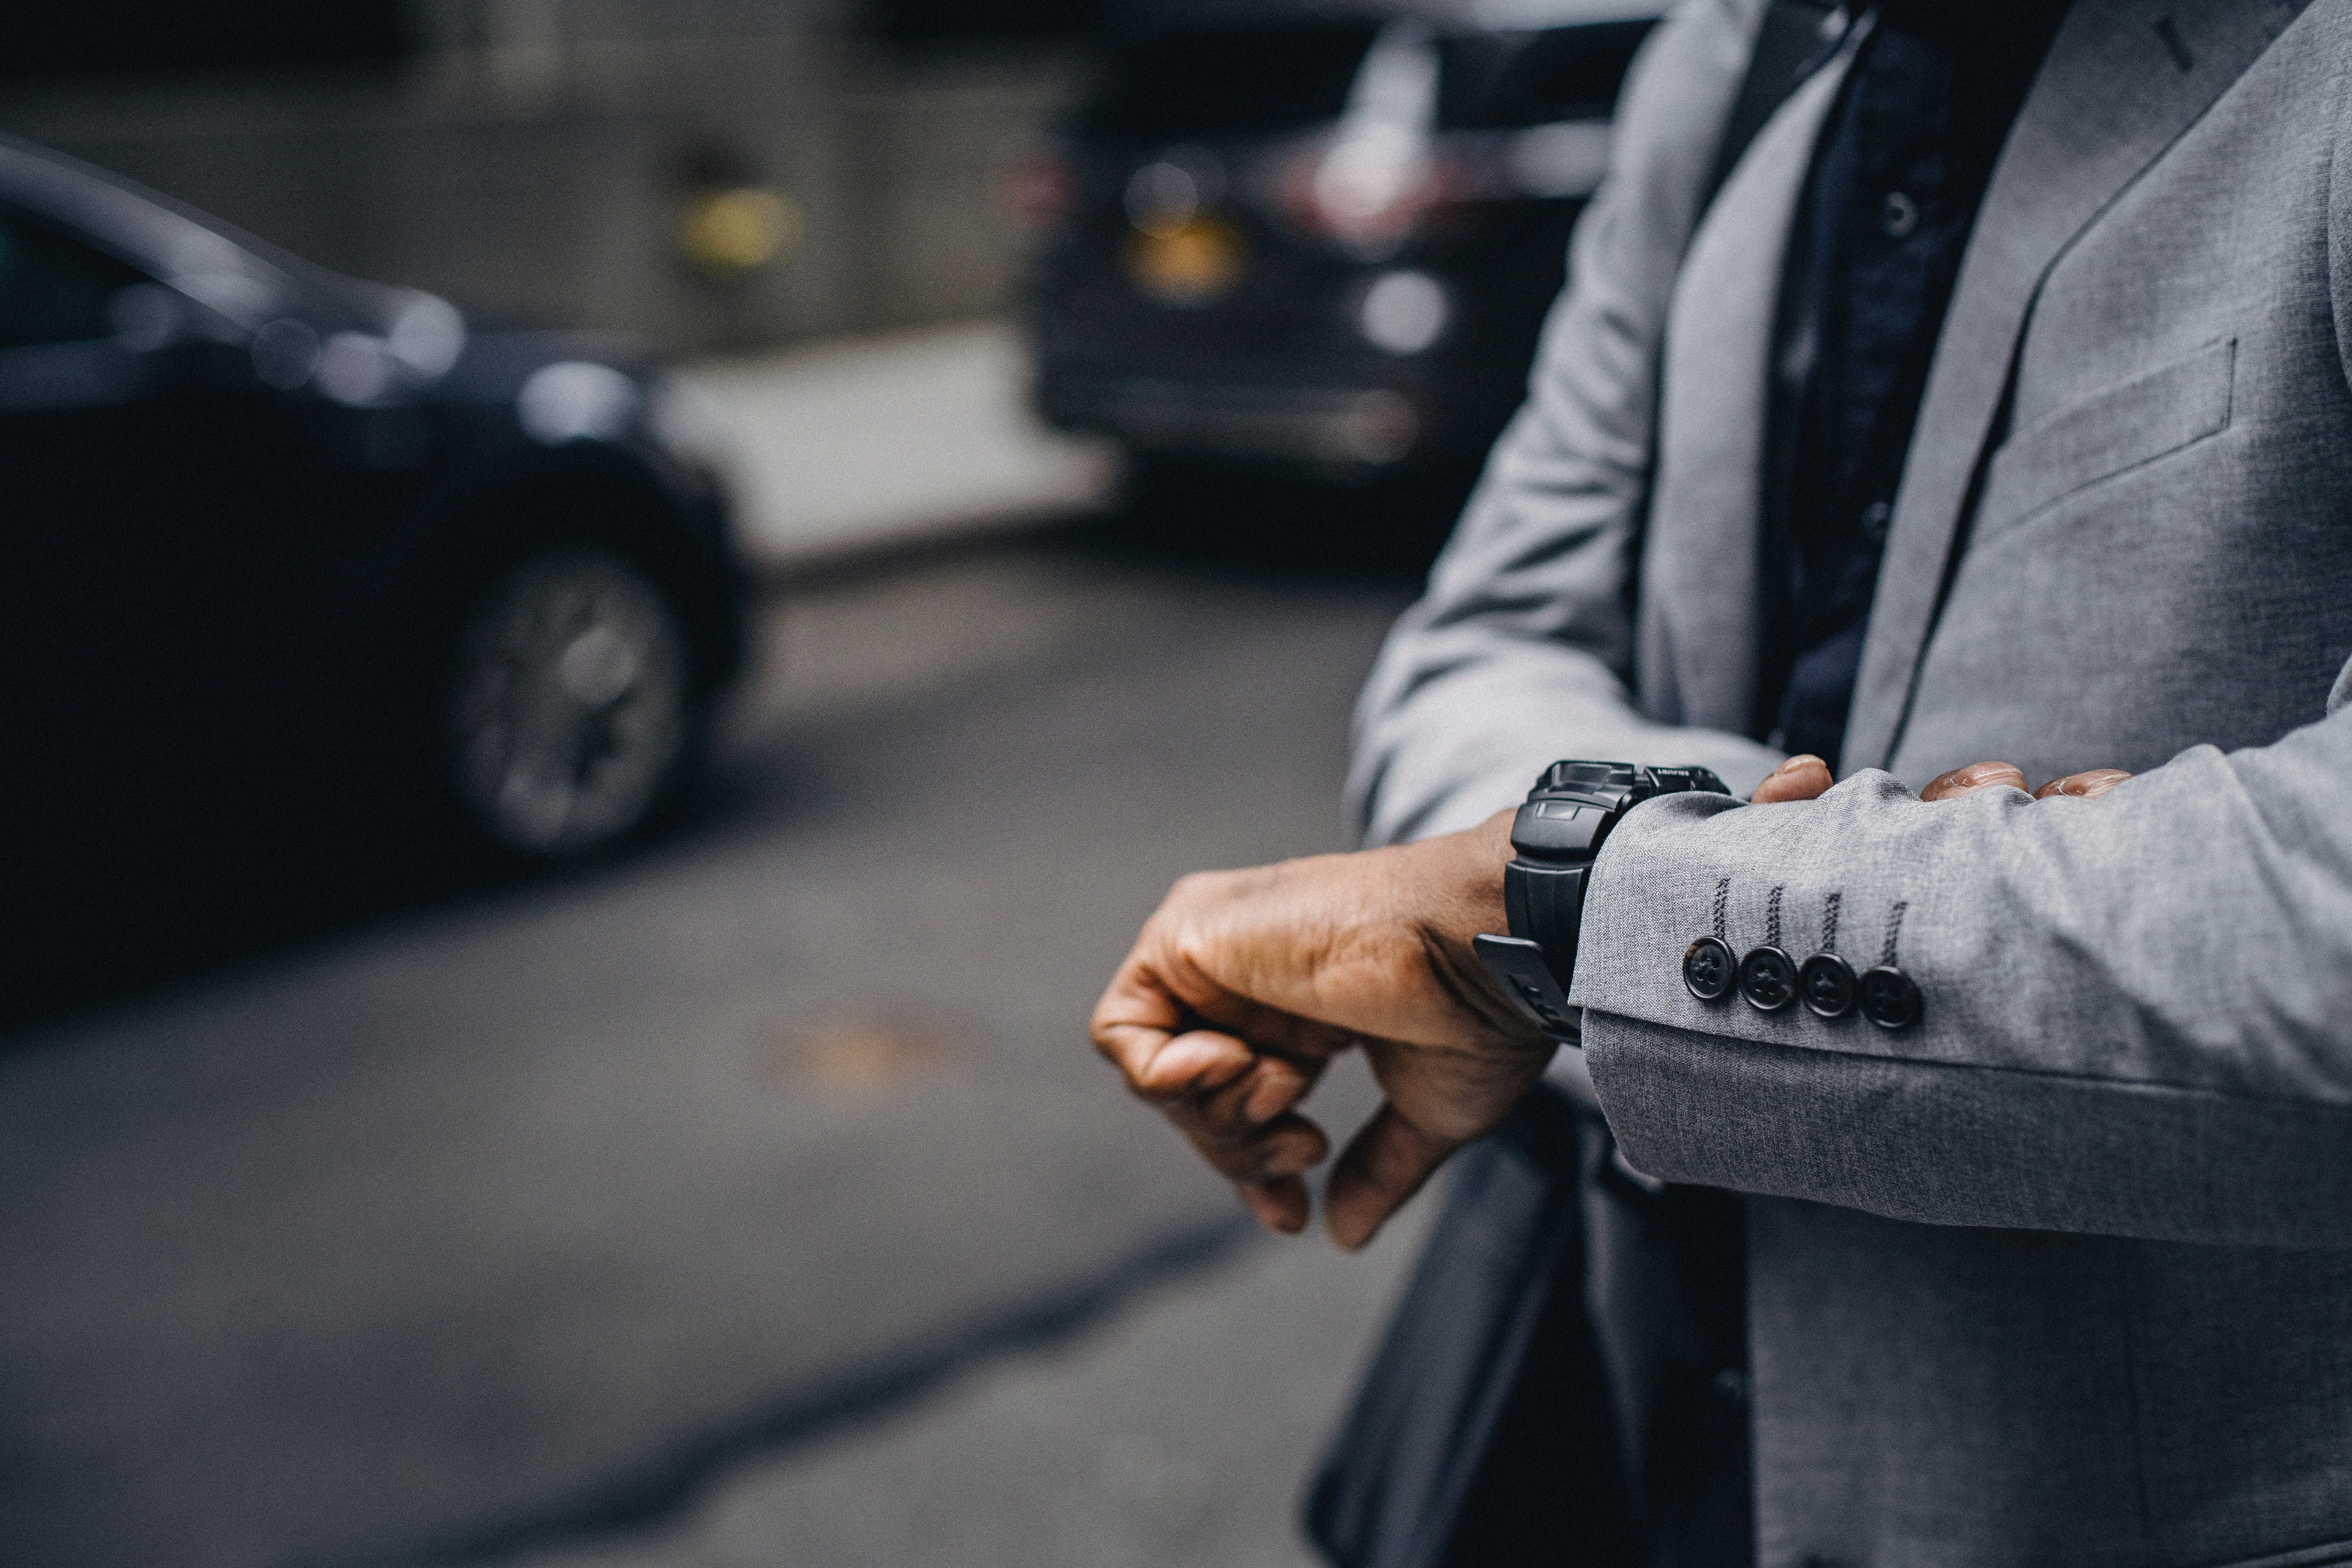 Stan was constantly checking his watch, afraid he wouldn't reach the airport on time | Photo: Pexels